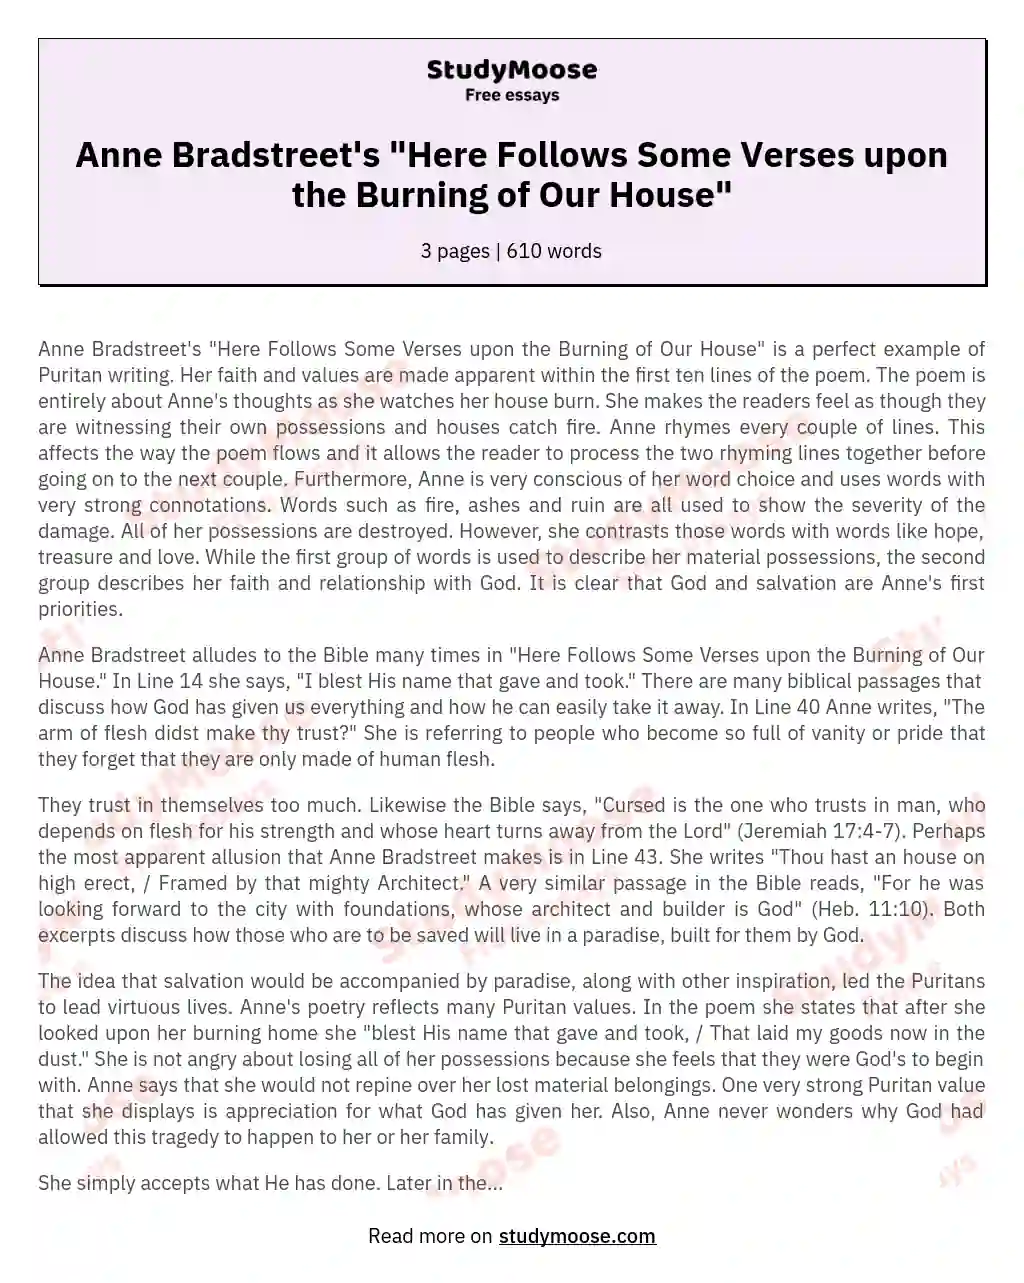 Anne Bradstreet's "Here Follows Some Verses upon the Burning of Our House" essay